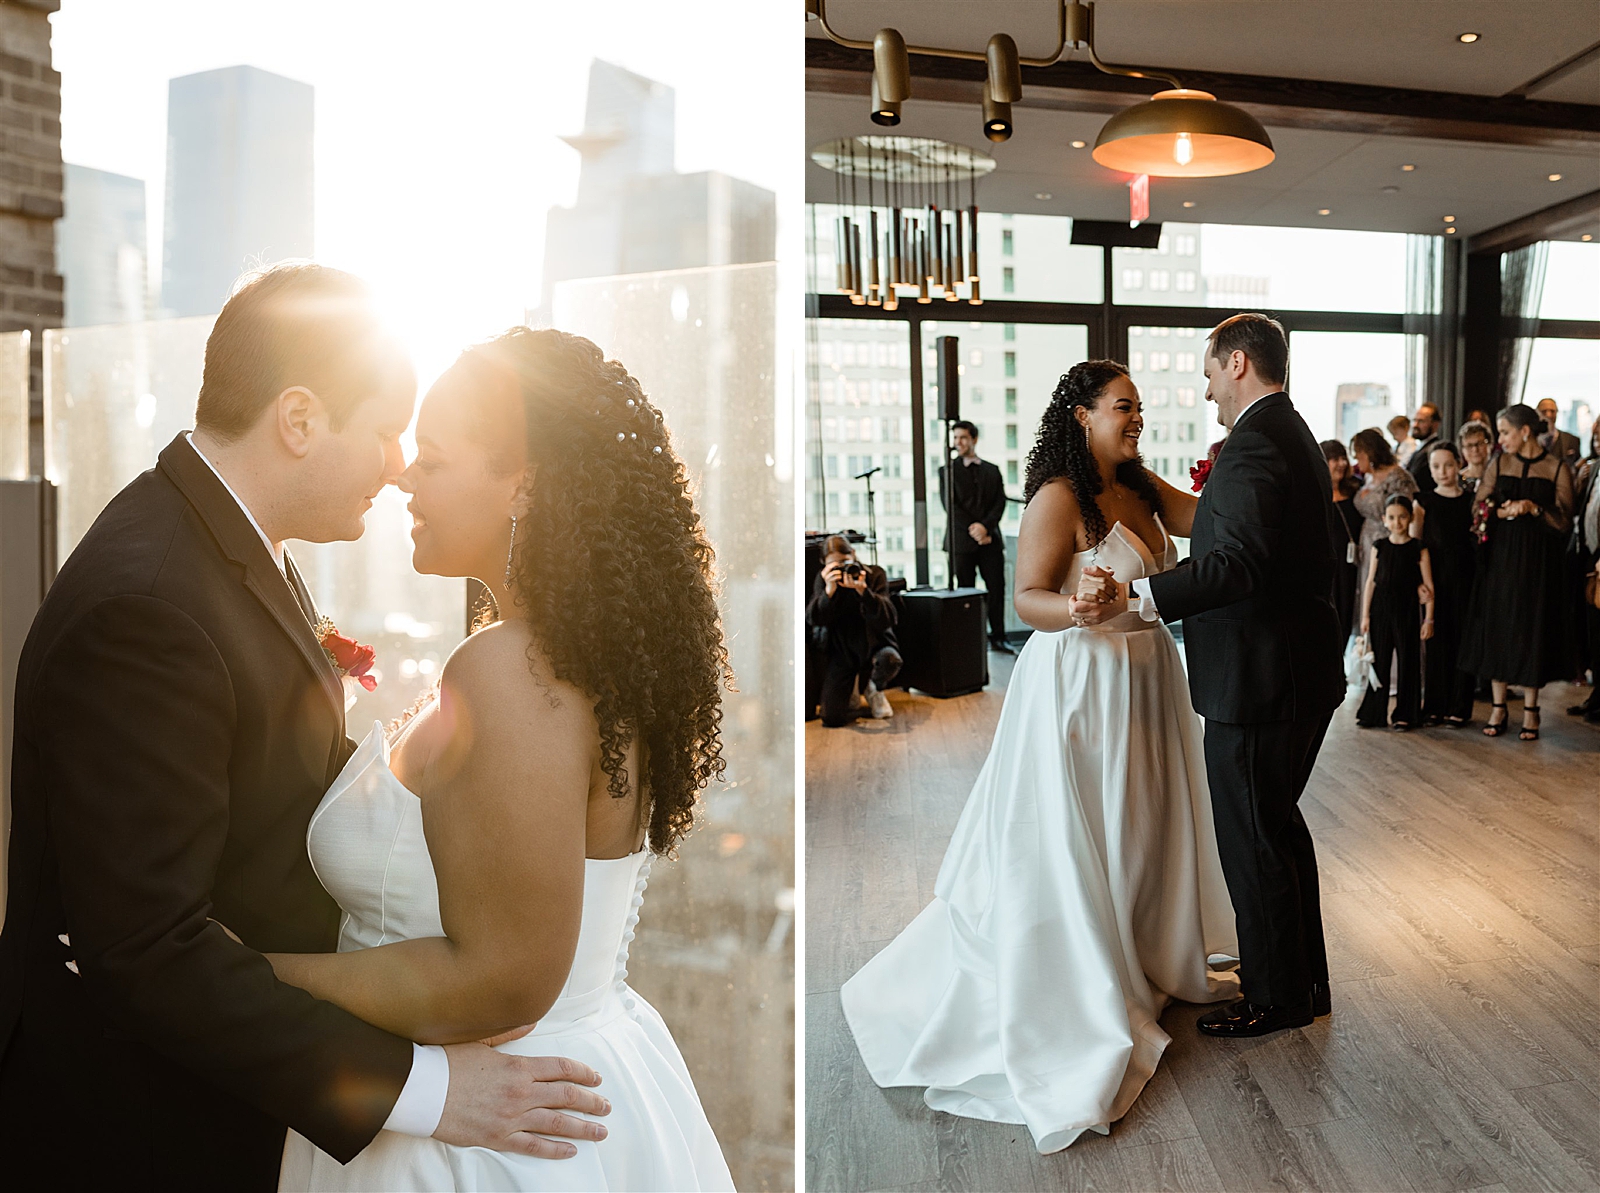 Left photo: Bride and Groom embrace outside during golden hour.
Right photo: Bride and Groom share a first dance.